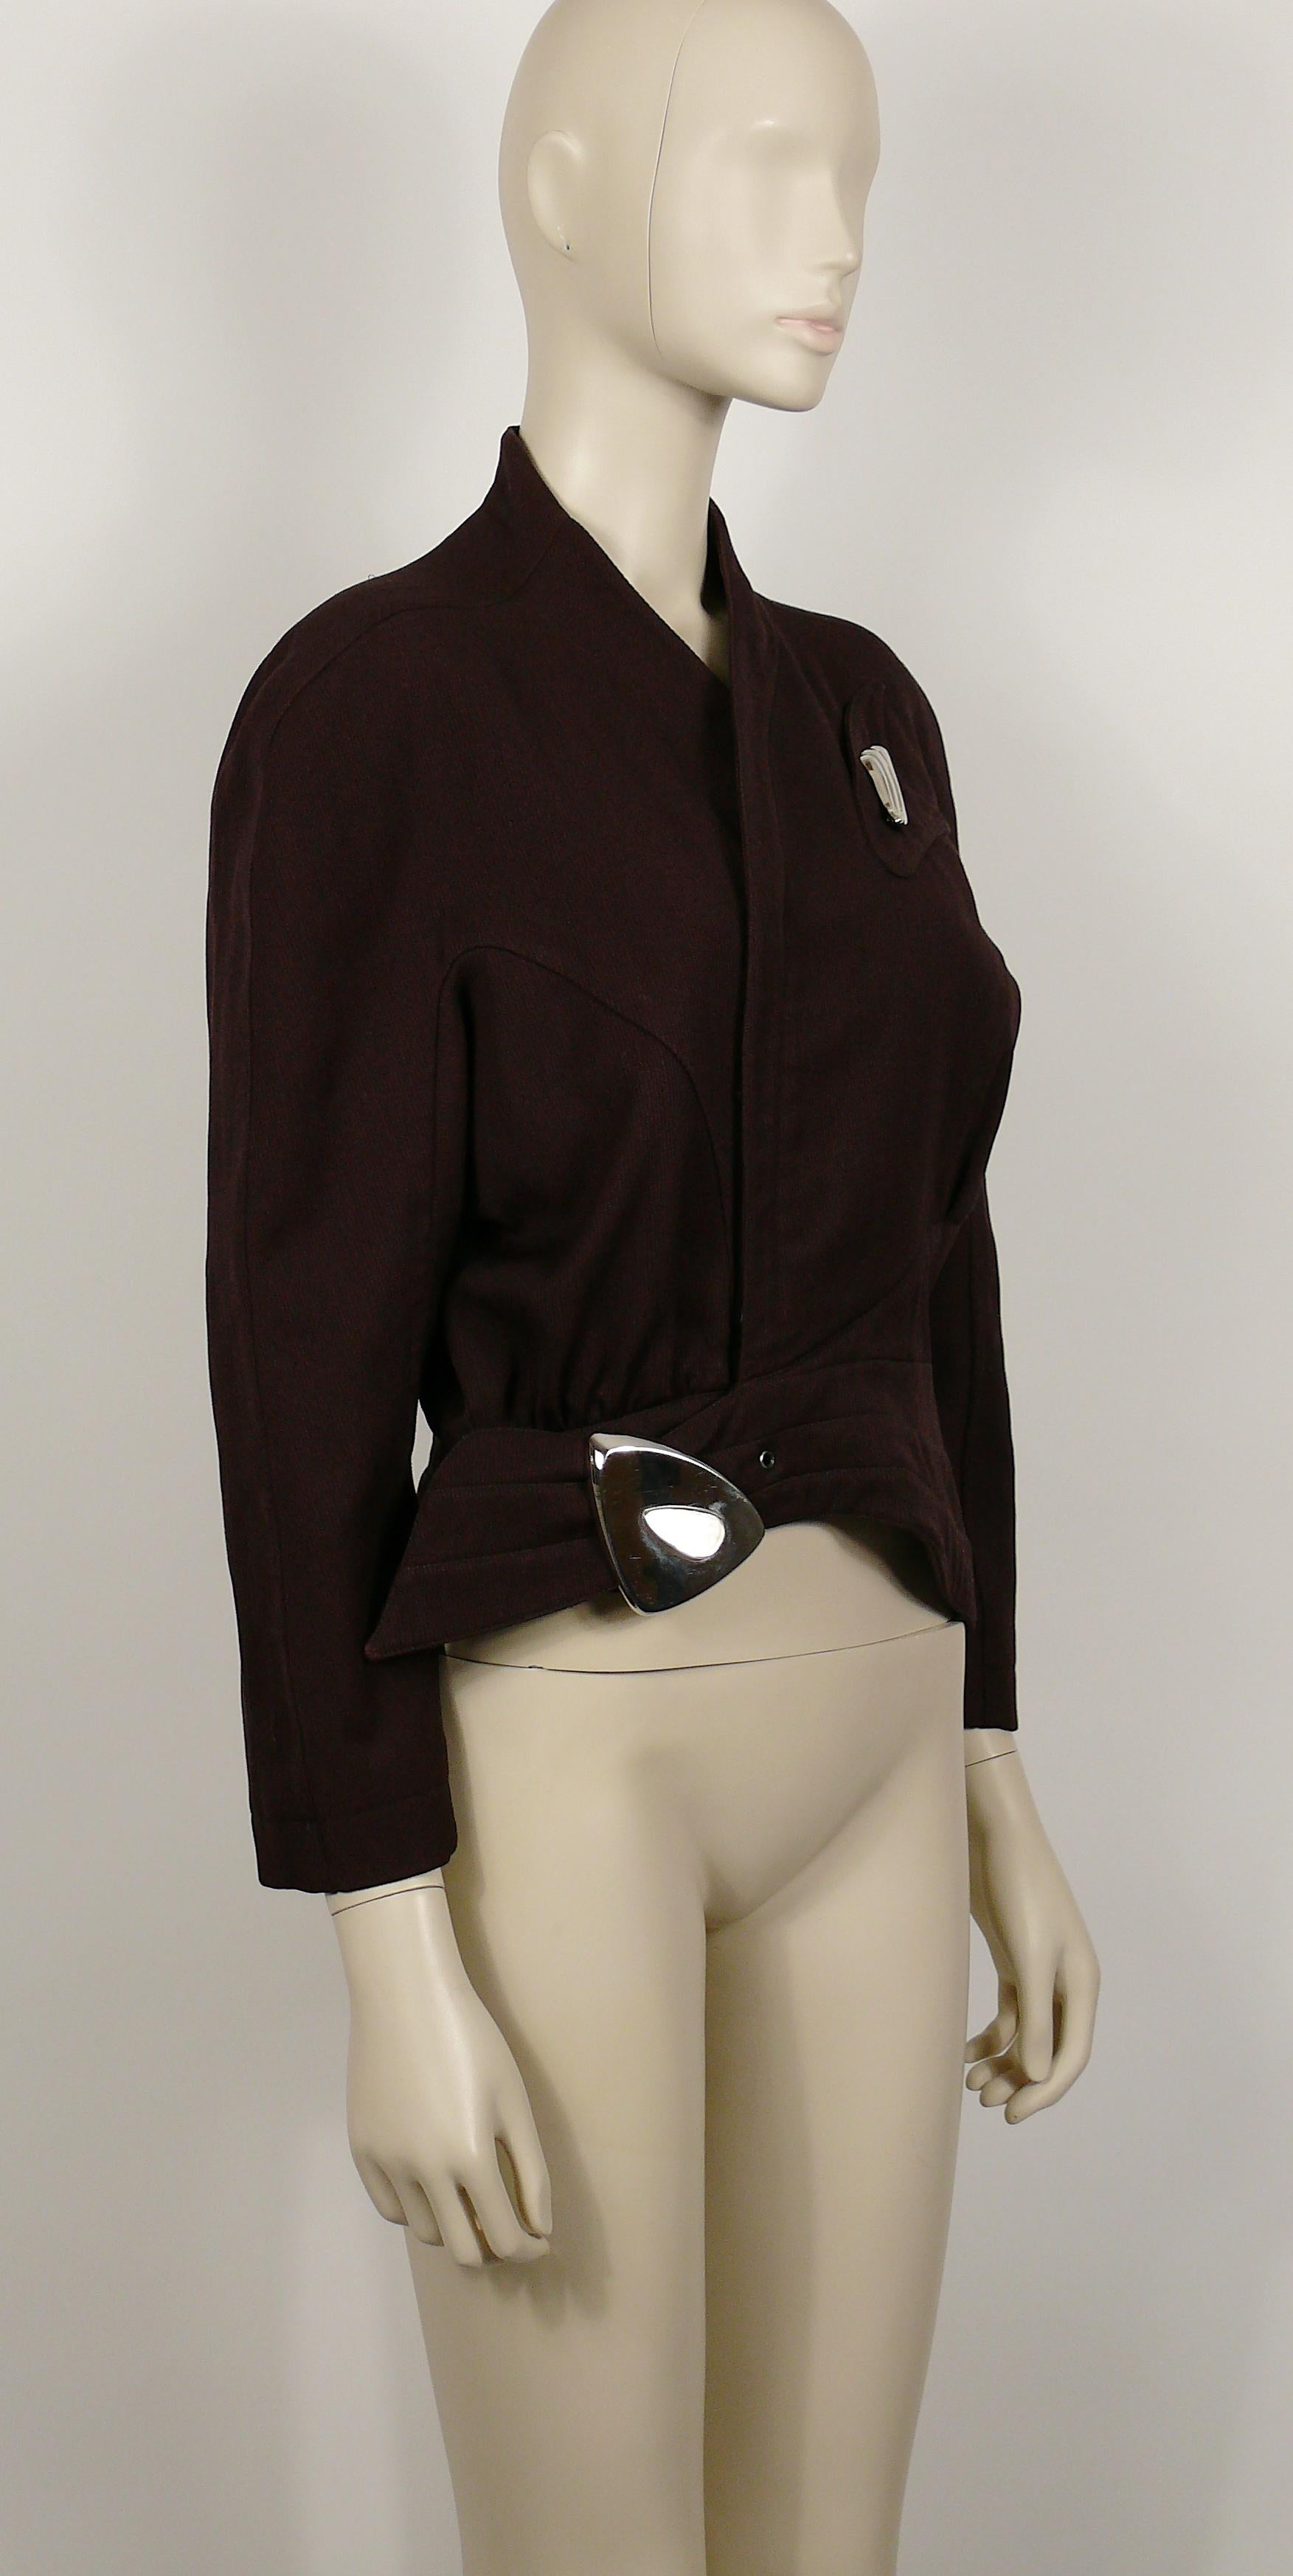 THIERRY MUGLER vintage plum asymmetrical iconic supple jacket featuring a large silver toned buckle detail and a removable wing like brooch.

This jacket is typical from THIERRY MUGLER's sculptural cut and aesthetic.

Hidden zip closure.
Fully